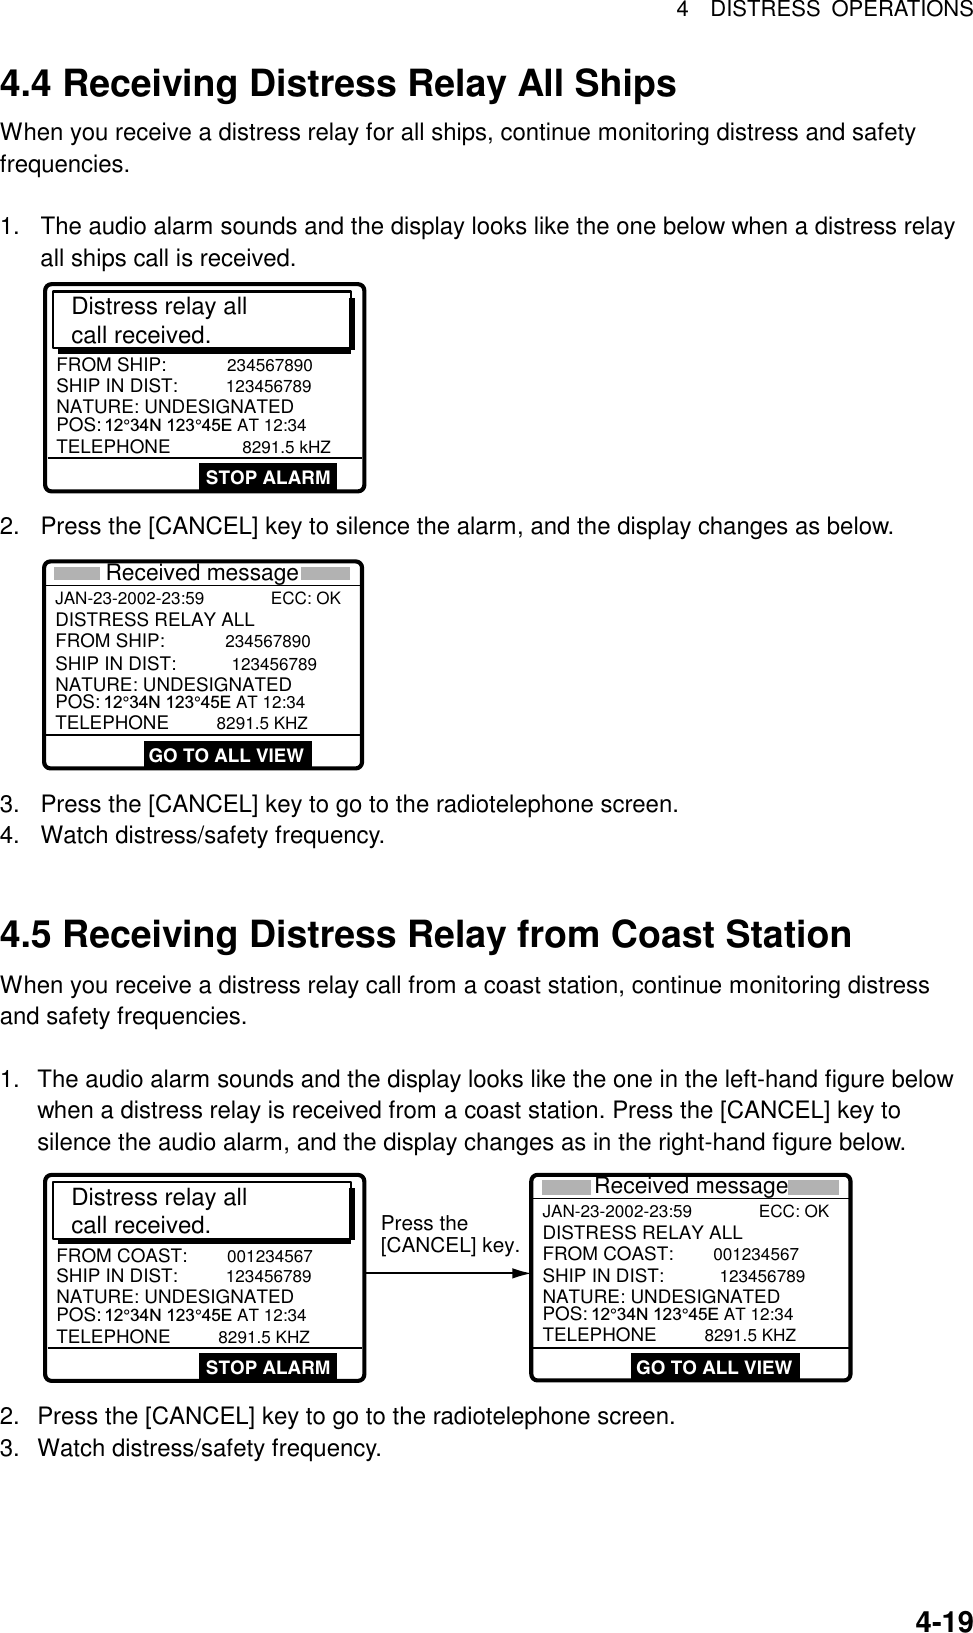 4  DISTRESS OPERATIONS  4-19   4.4 Receiving Distress Relay All Ships When you receive a distress relay for all ships, continue monitoring distress and safety frequencies.  1.  The audio alarm sounds and the display looks like the one below when a distress relay all ships call is received. Distress relay all call received.SHIP IN DIST: 123456789POS: 12°34N 123°45E AT 12:34TELEPHONE          8291.5 kHZFROM SHIP: 234567890NATURE: UNDESIGNATEDSTOP ALARM 2.  Press the [CANCEL] key to silence the alarm, and the display changes as below.   JAN-23-2002-23:59              ECC: OK   SHIP IN DIST: 123456789POS:  12°34N 123°45E AT 12:34TELEPHONE     8291.5 KHZFROM SHIP: 234567890NATURE: UNDESIGNATEDDISTRESS RELAY ALL GO TO ALL VIEWReceived message 3.  Press the [CANCEL] key to go to the radiotelephone screen. 4.  Watch distress/safety frequency.   4.5 Receiving Distress Relay from Coast Station When you receive a distress relay call from a coast station, continue monitoring distress and safety frequencies.  1.  The audio alarm sounds and the display looks like the one in the left-hand figure below when a distress relay is received from a coast station. Press the [CANCEL] key to silence the audio alarm, and the display changes as in the right-hand figure below. Distress relay all call received.SHIP IN DIST:  123456789POS: 12°34N 123°45E AT 12:34TELEPHONE      8291.5 KHZFROM COAST:  001234567NATURE: UNDESIGNATEDSTOP ALARM Press the[CANCEL] key.JAN-23-2002-23:59              ECC: OK  SHIP IN DIST:  123456789POS:  12°34N 123°45E AT 12:34TELEPHONE      8291.5 KHZFROM COAST:  001234567NATURE: UNDESIGNATEDDISTRESS RELAY ALLReceived message GO TO ALL VIEW 2.  Press the [CANCEL] key to go to the radiotelephone screen. 3.  Watch distress/safety frequency. 